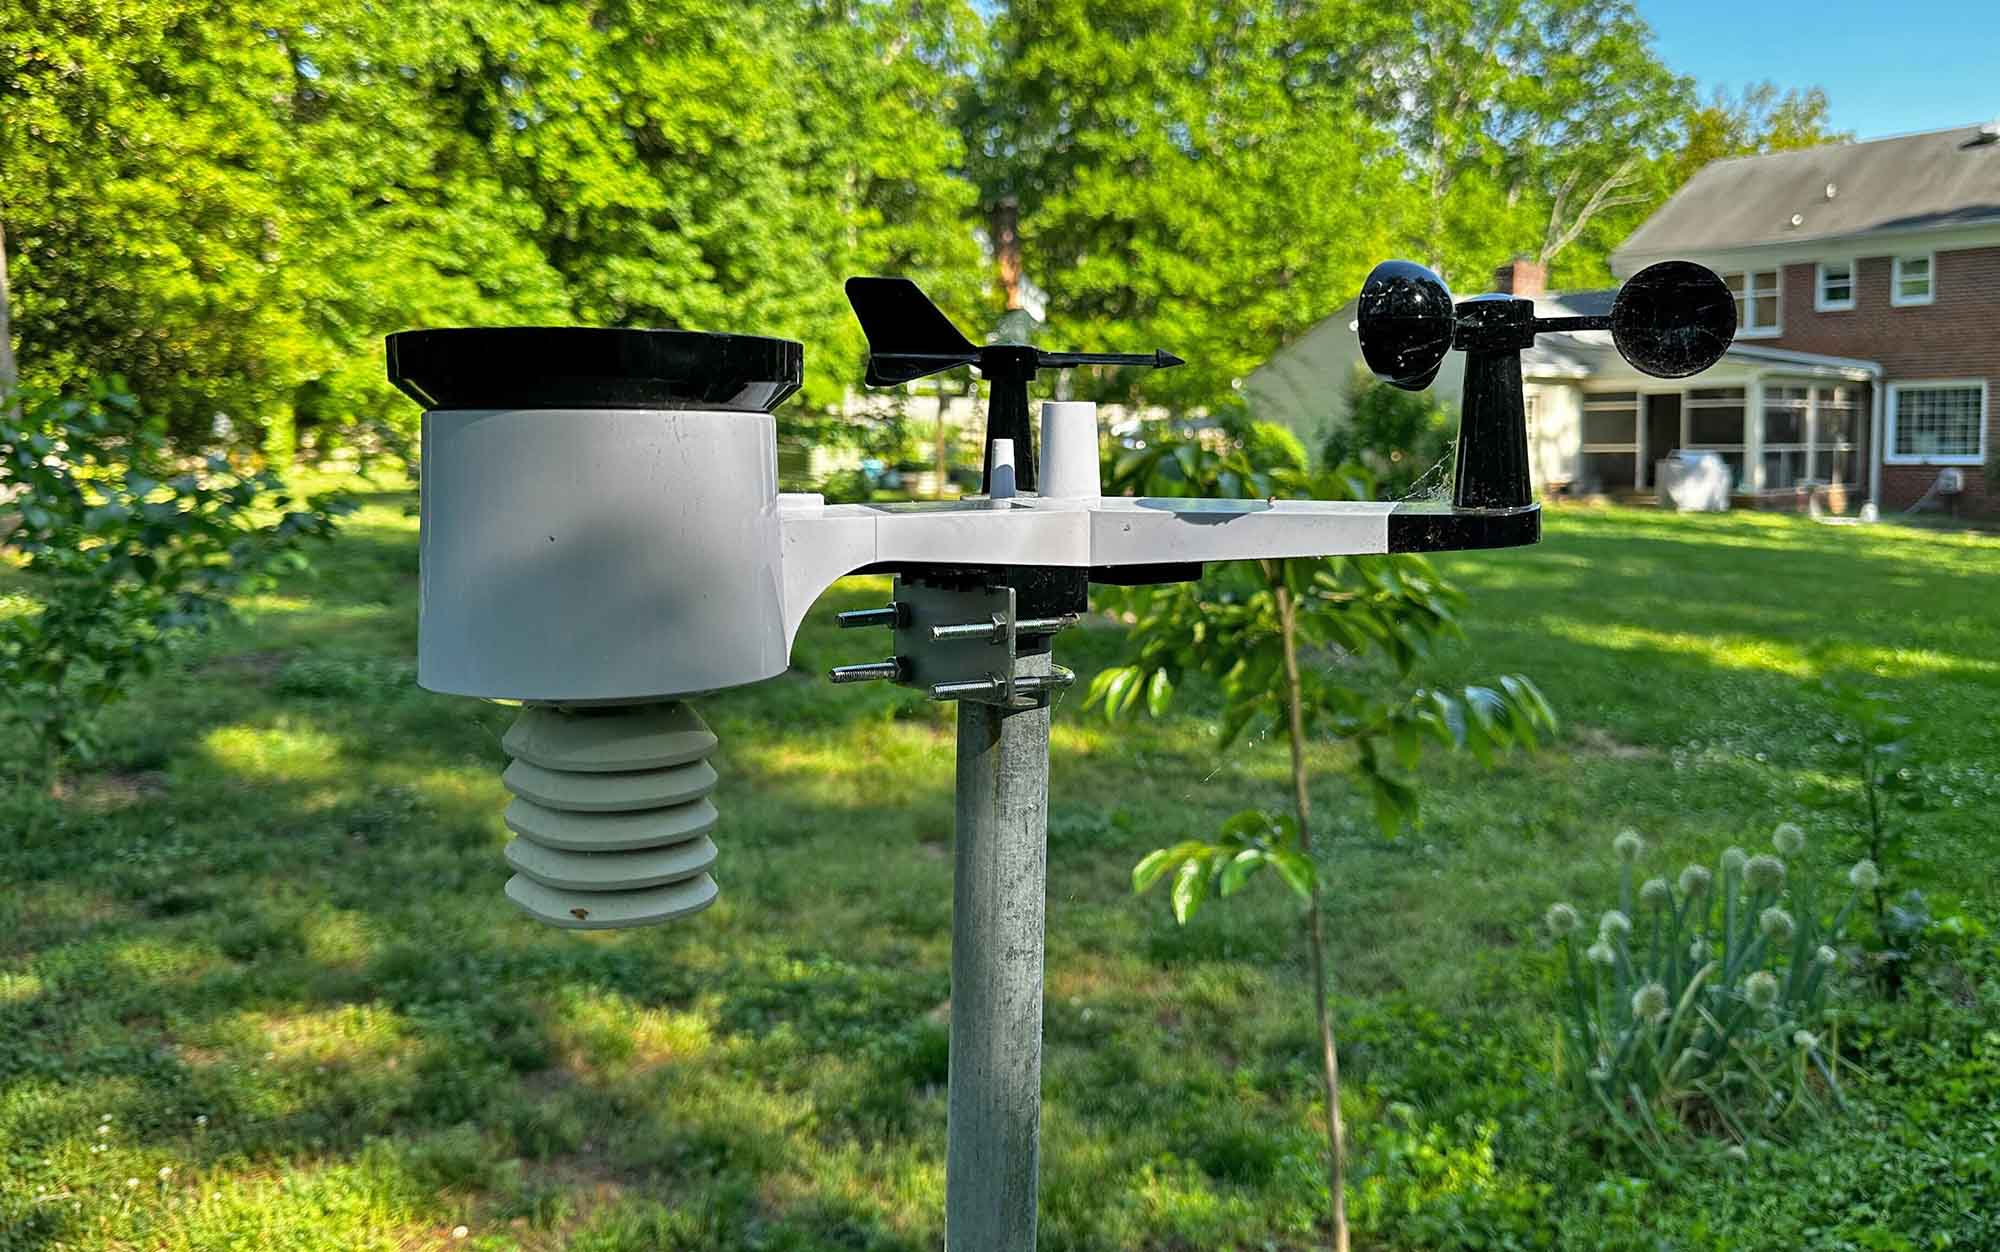 The Ambient Weather Wireless Home Weather Station testing is installed in a backyard.